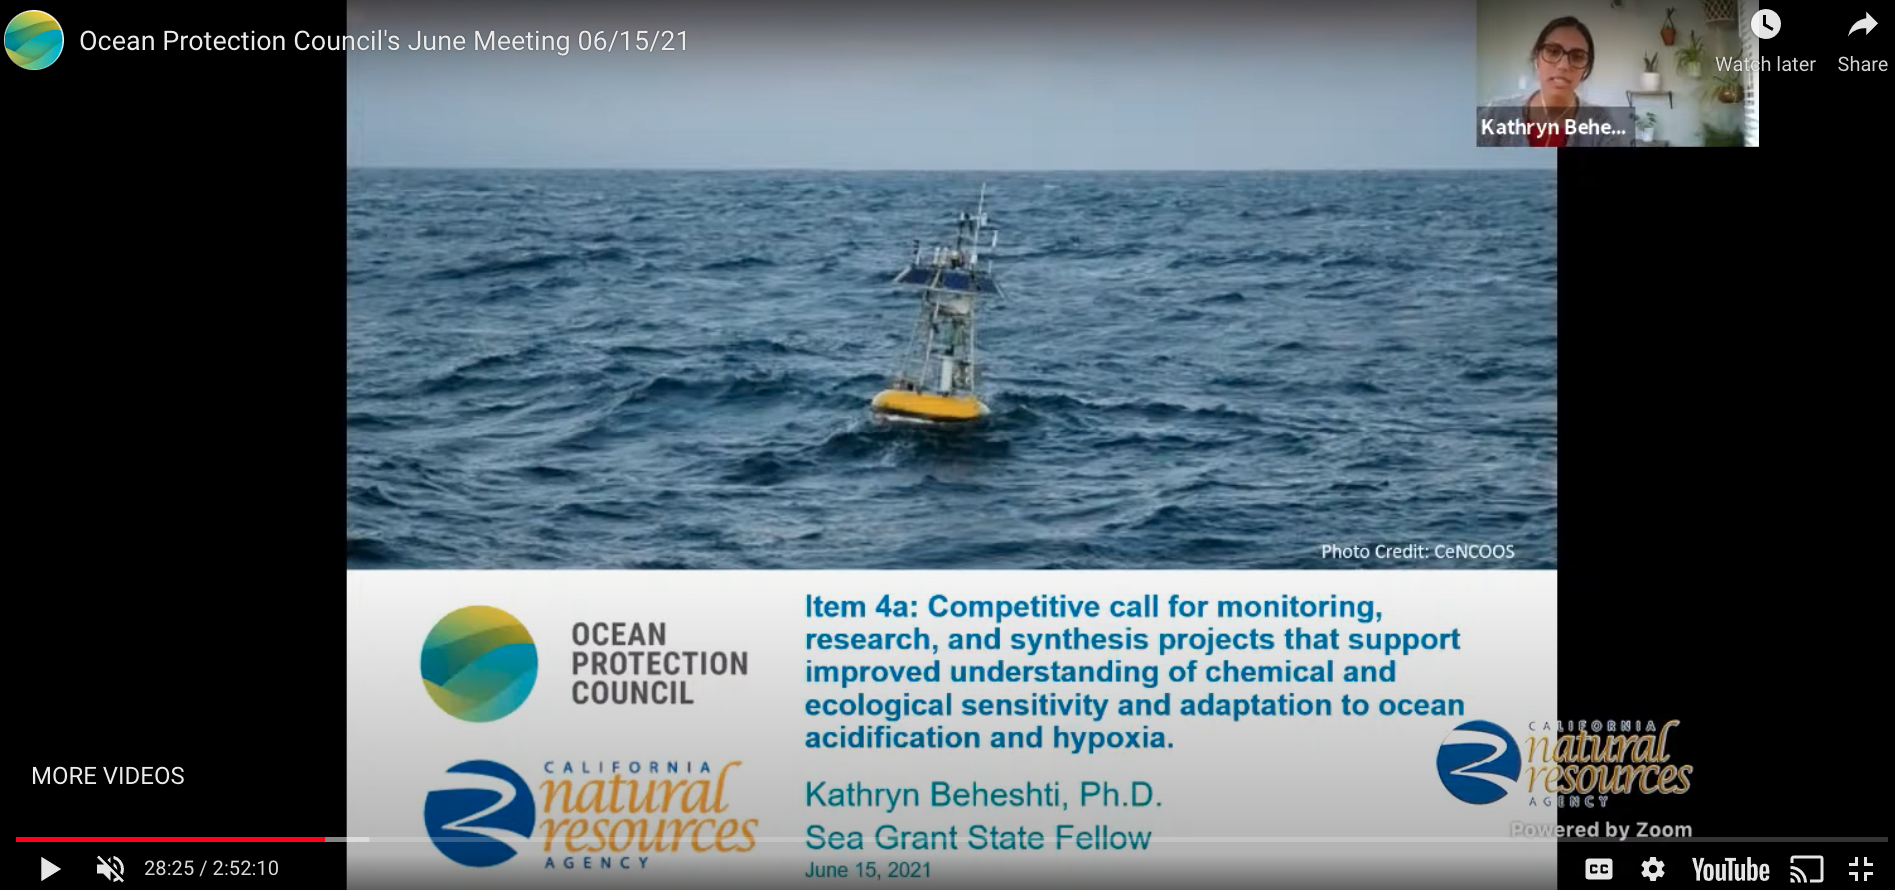 Kat presented at the June 2021 OPC Council Meeting a staff recommendation to disburse funds to CA Sea Grant to administer the solicitation for a Proposition 68 Ocean Acidification and Hypoxia Competitive Solicitation.